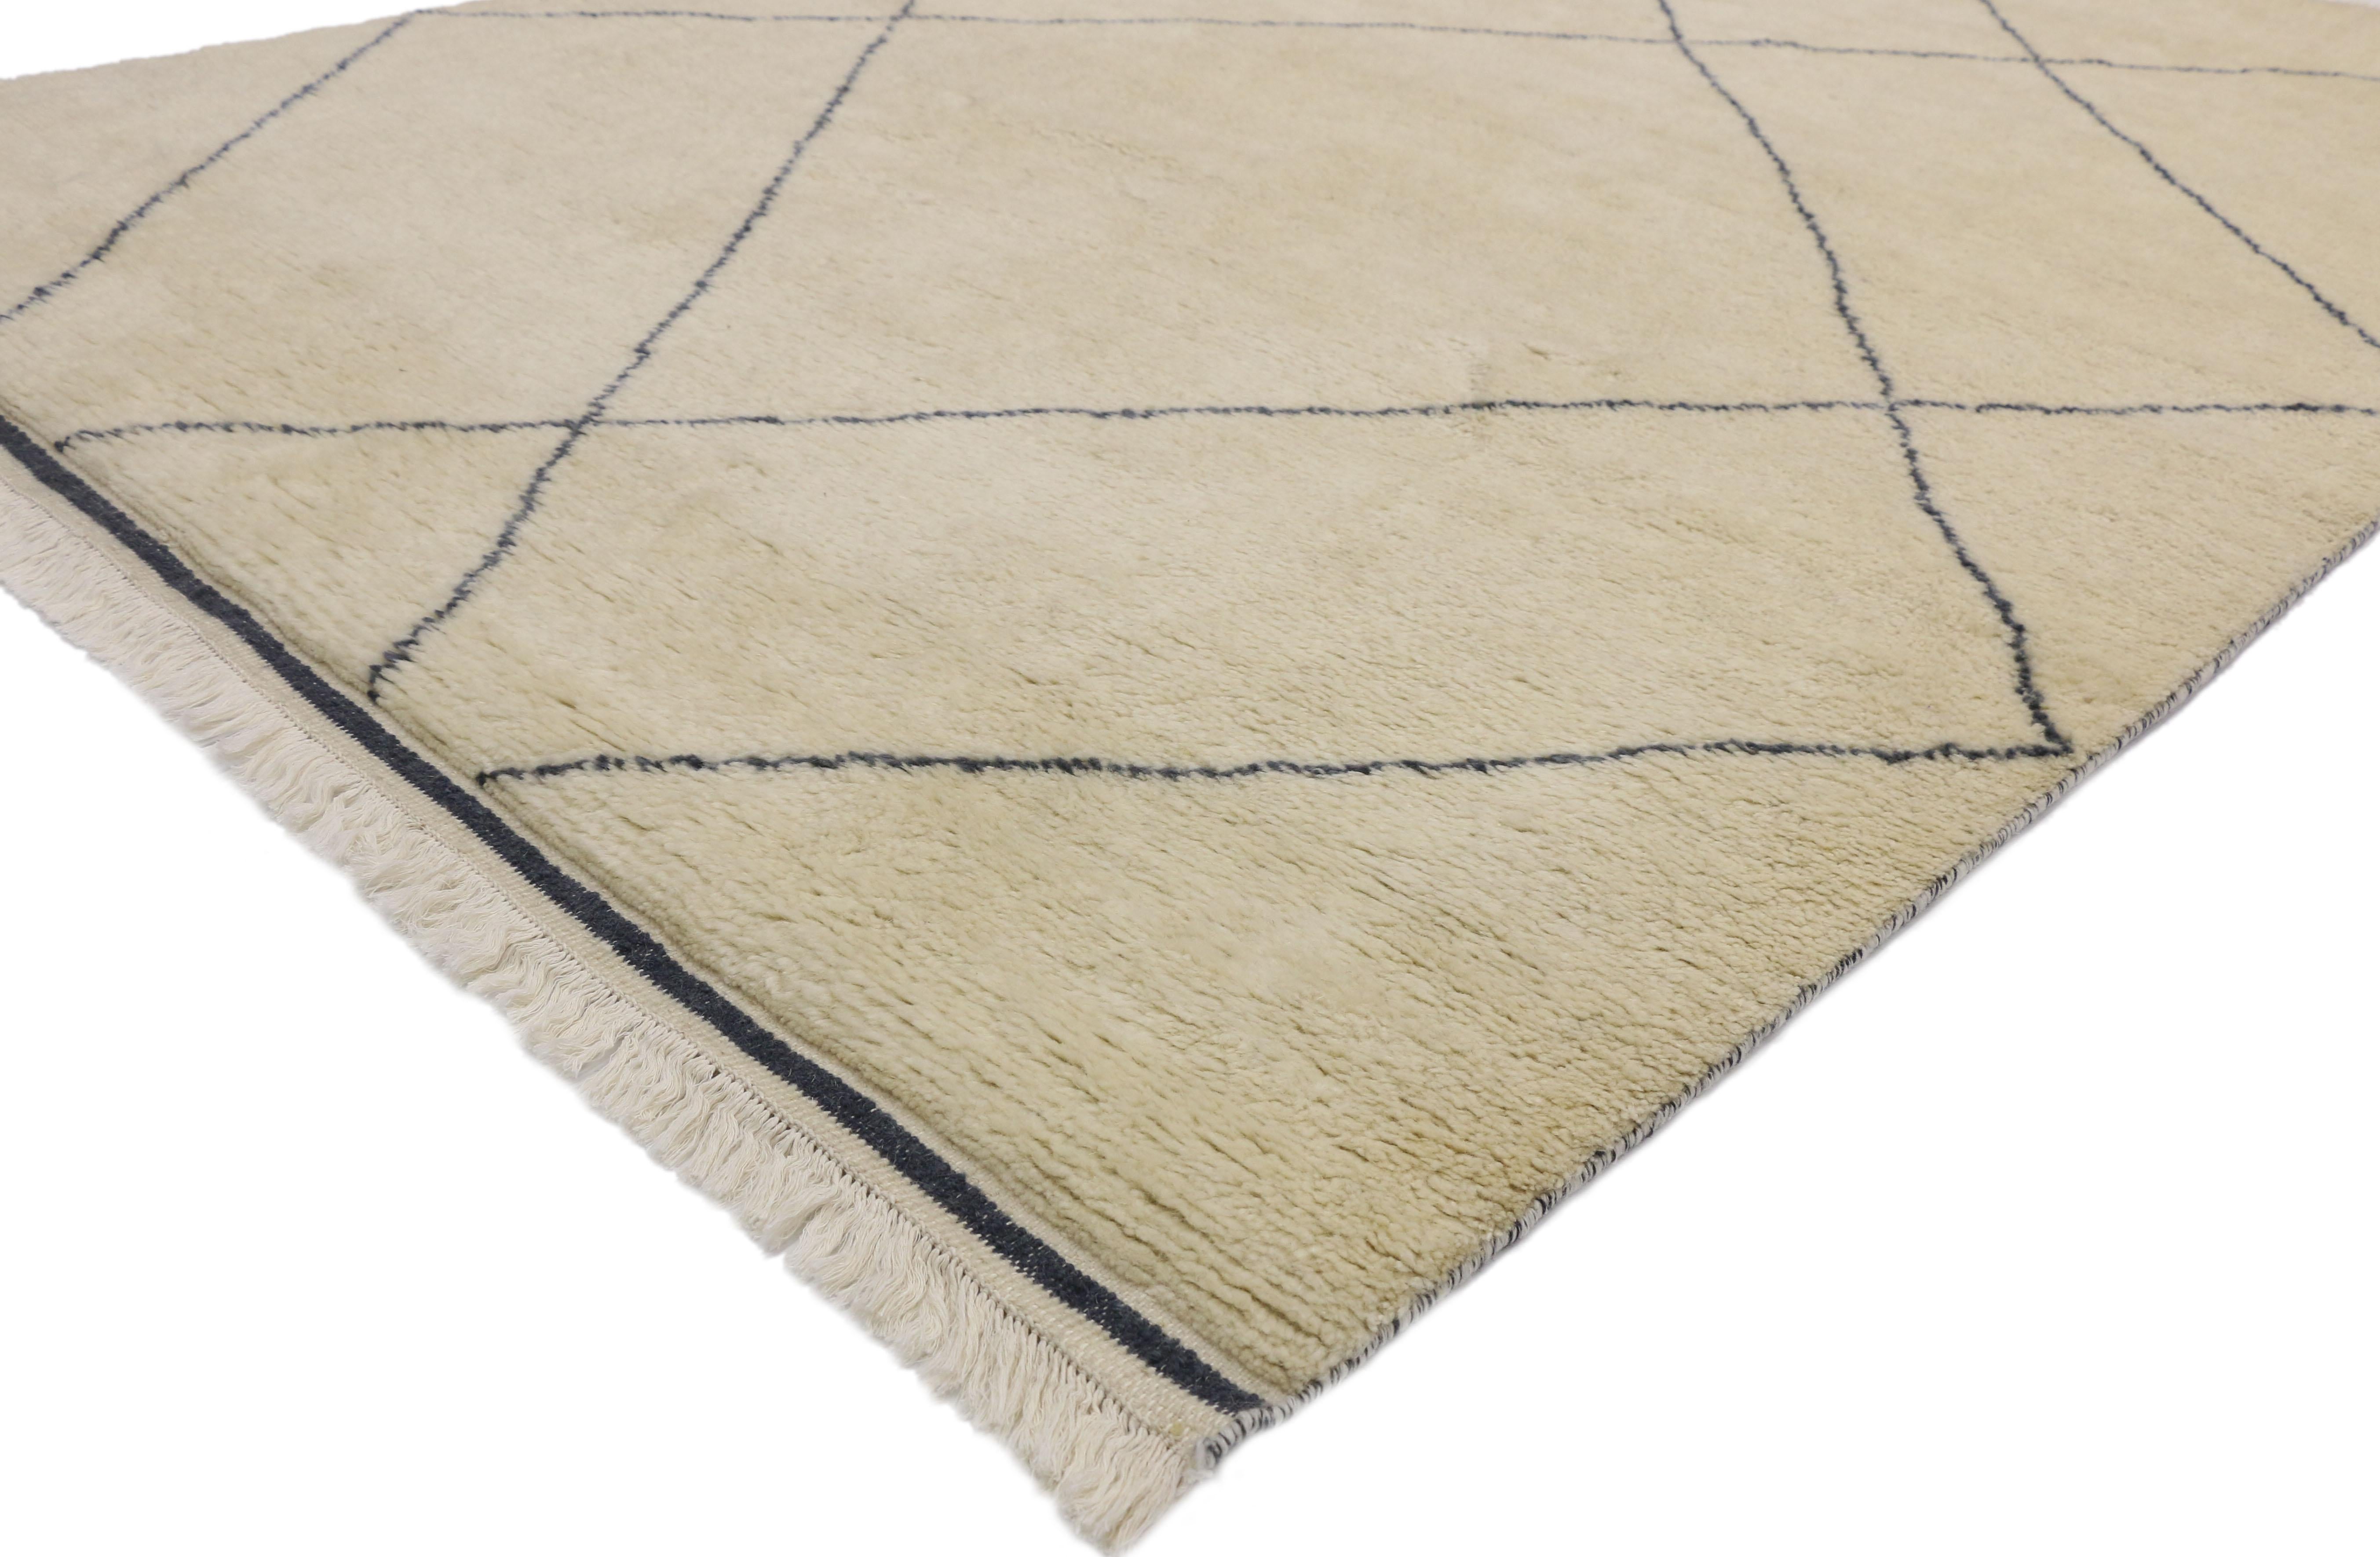 30484 New Contemporary Moroccan Area Rug with Mid-Century Modern Style and Hygge Vibes 06'01 x 08'08. With its simplicity, plush pile and Mid-Century Modern vibes, this hand knotted wool contemporary Moroccan style rug provides a feeling of cozy